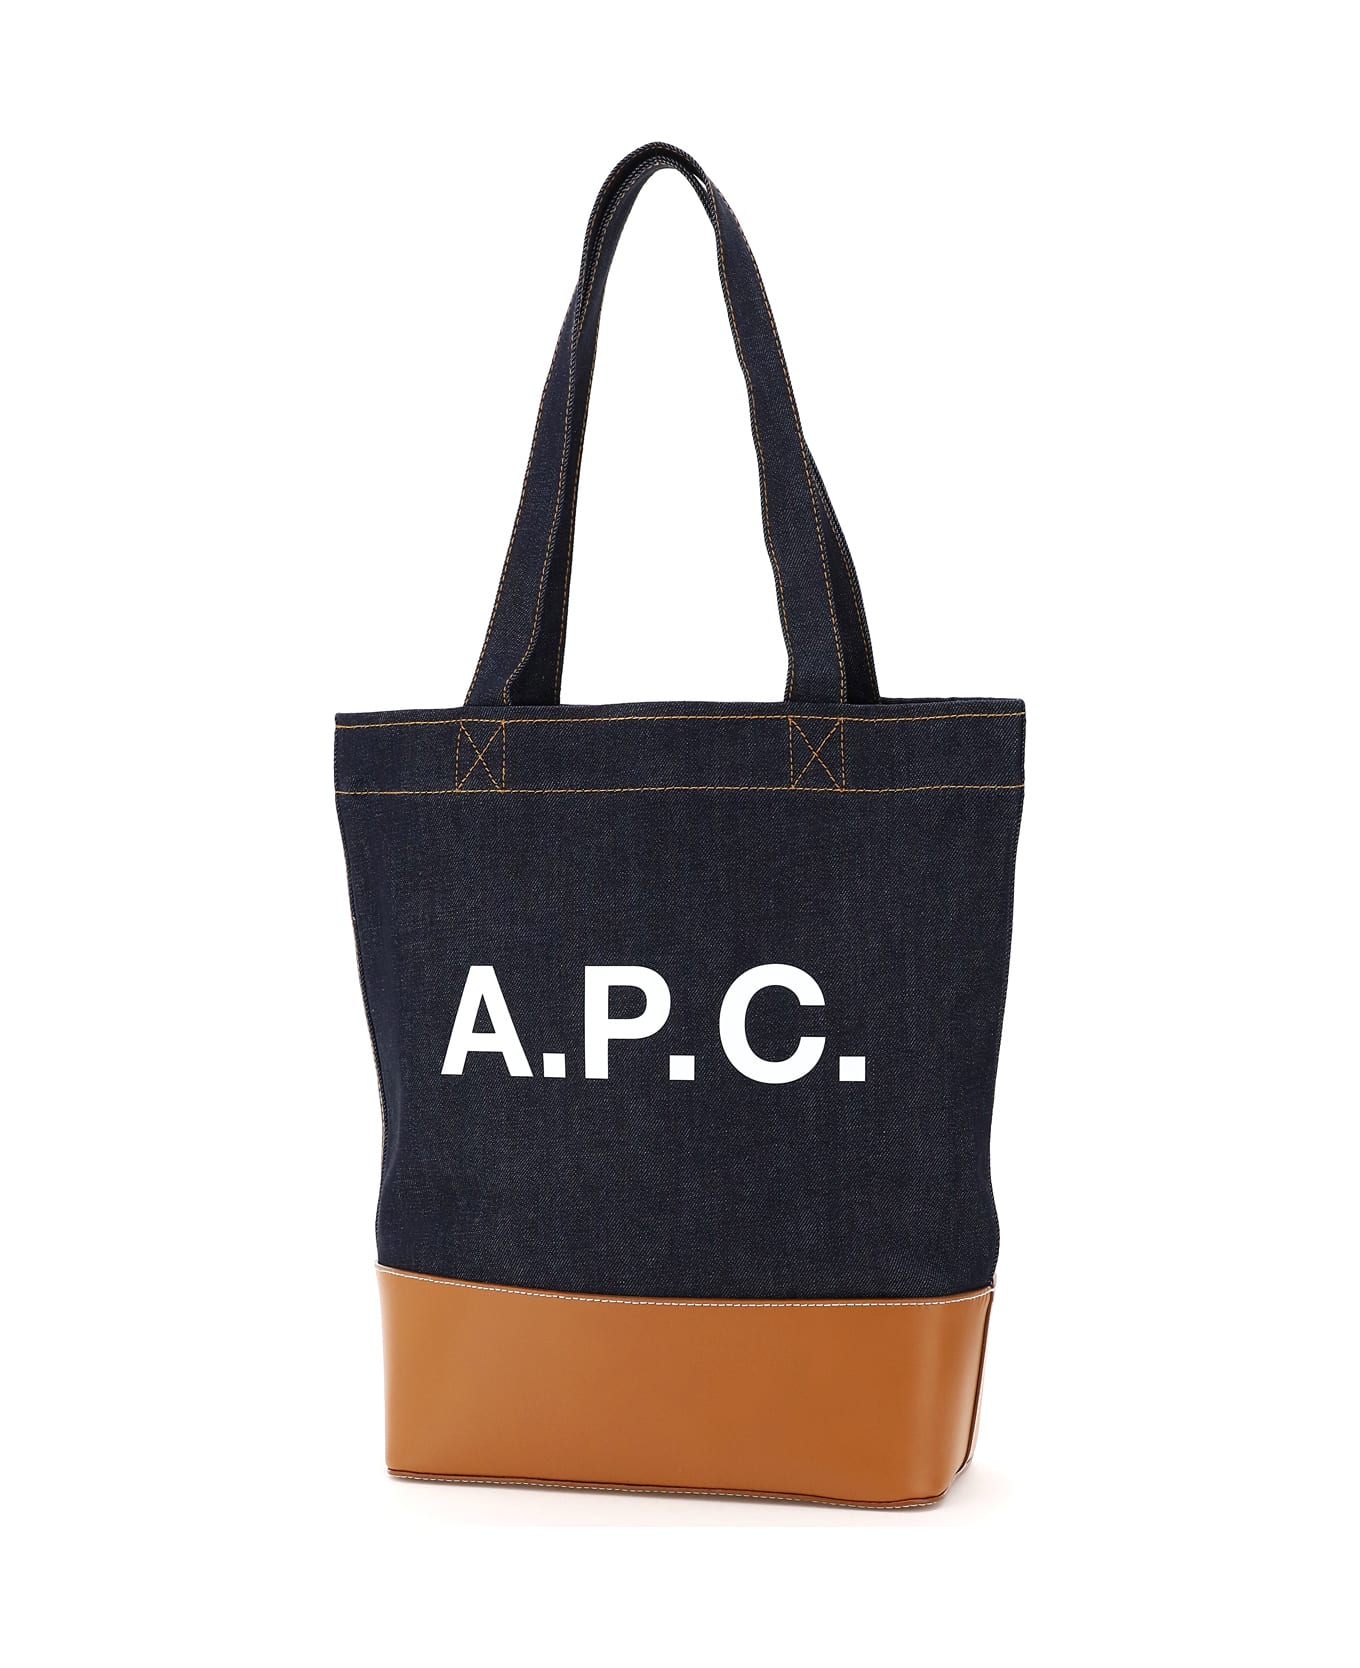 A.P.C. Axelle Tote Bag - Brown